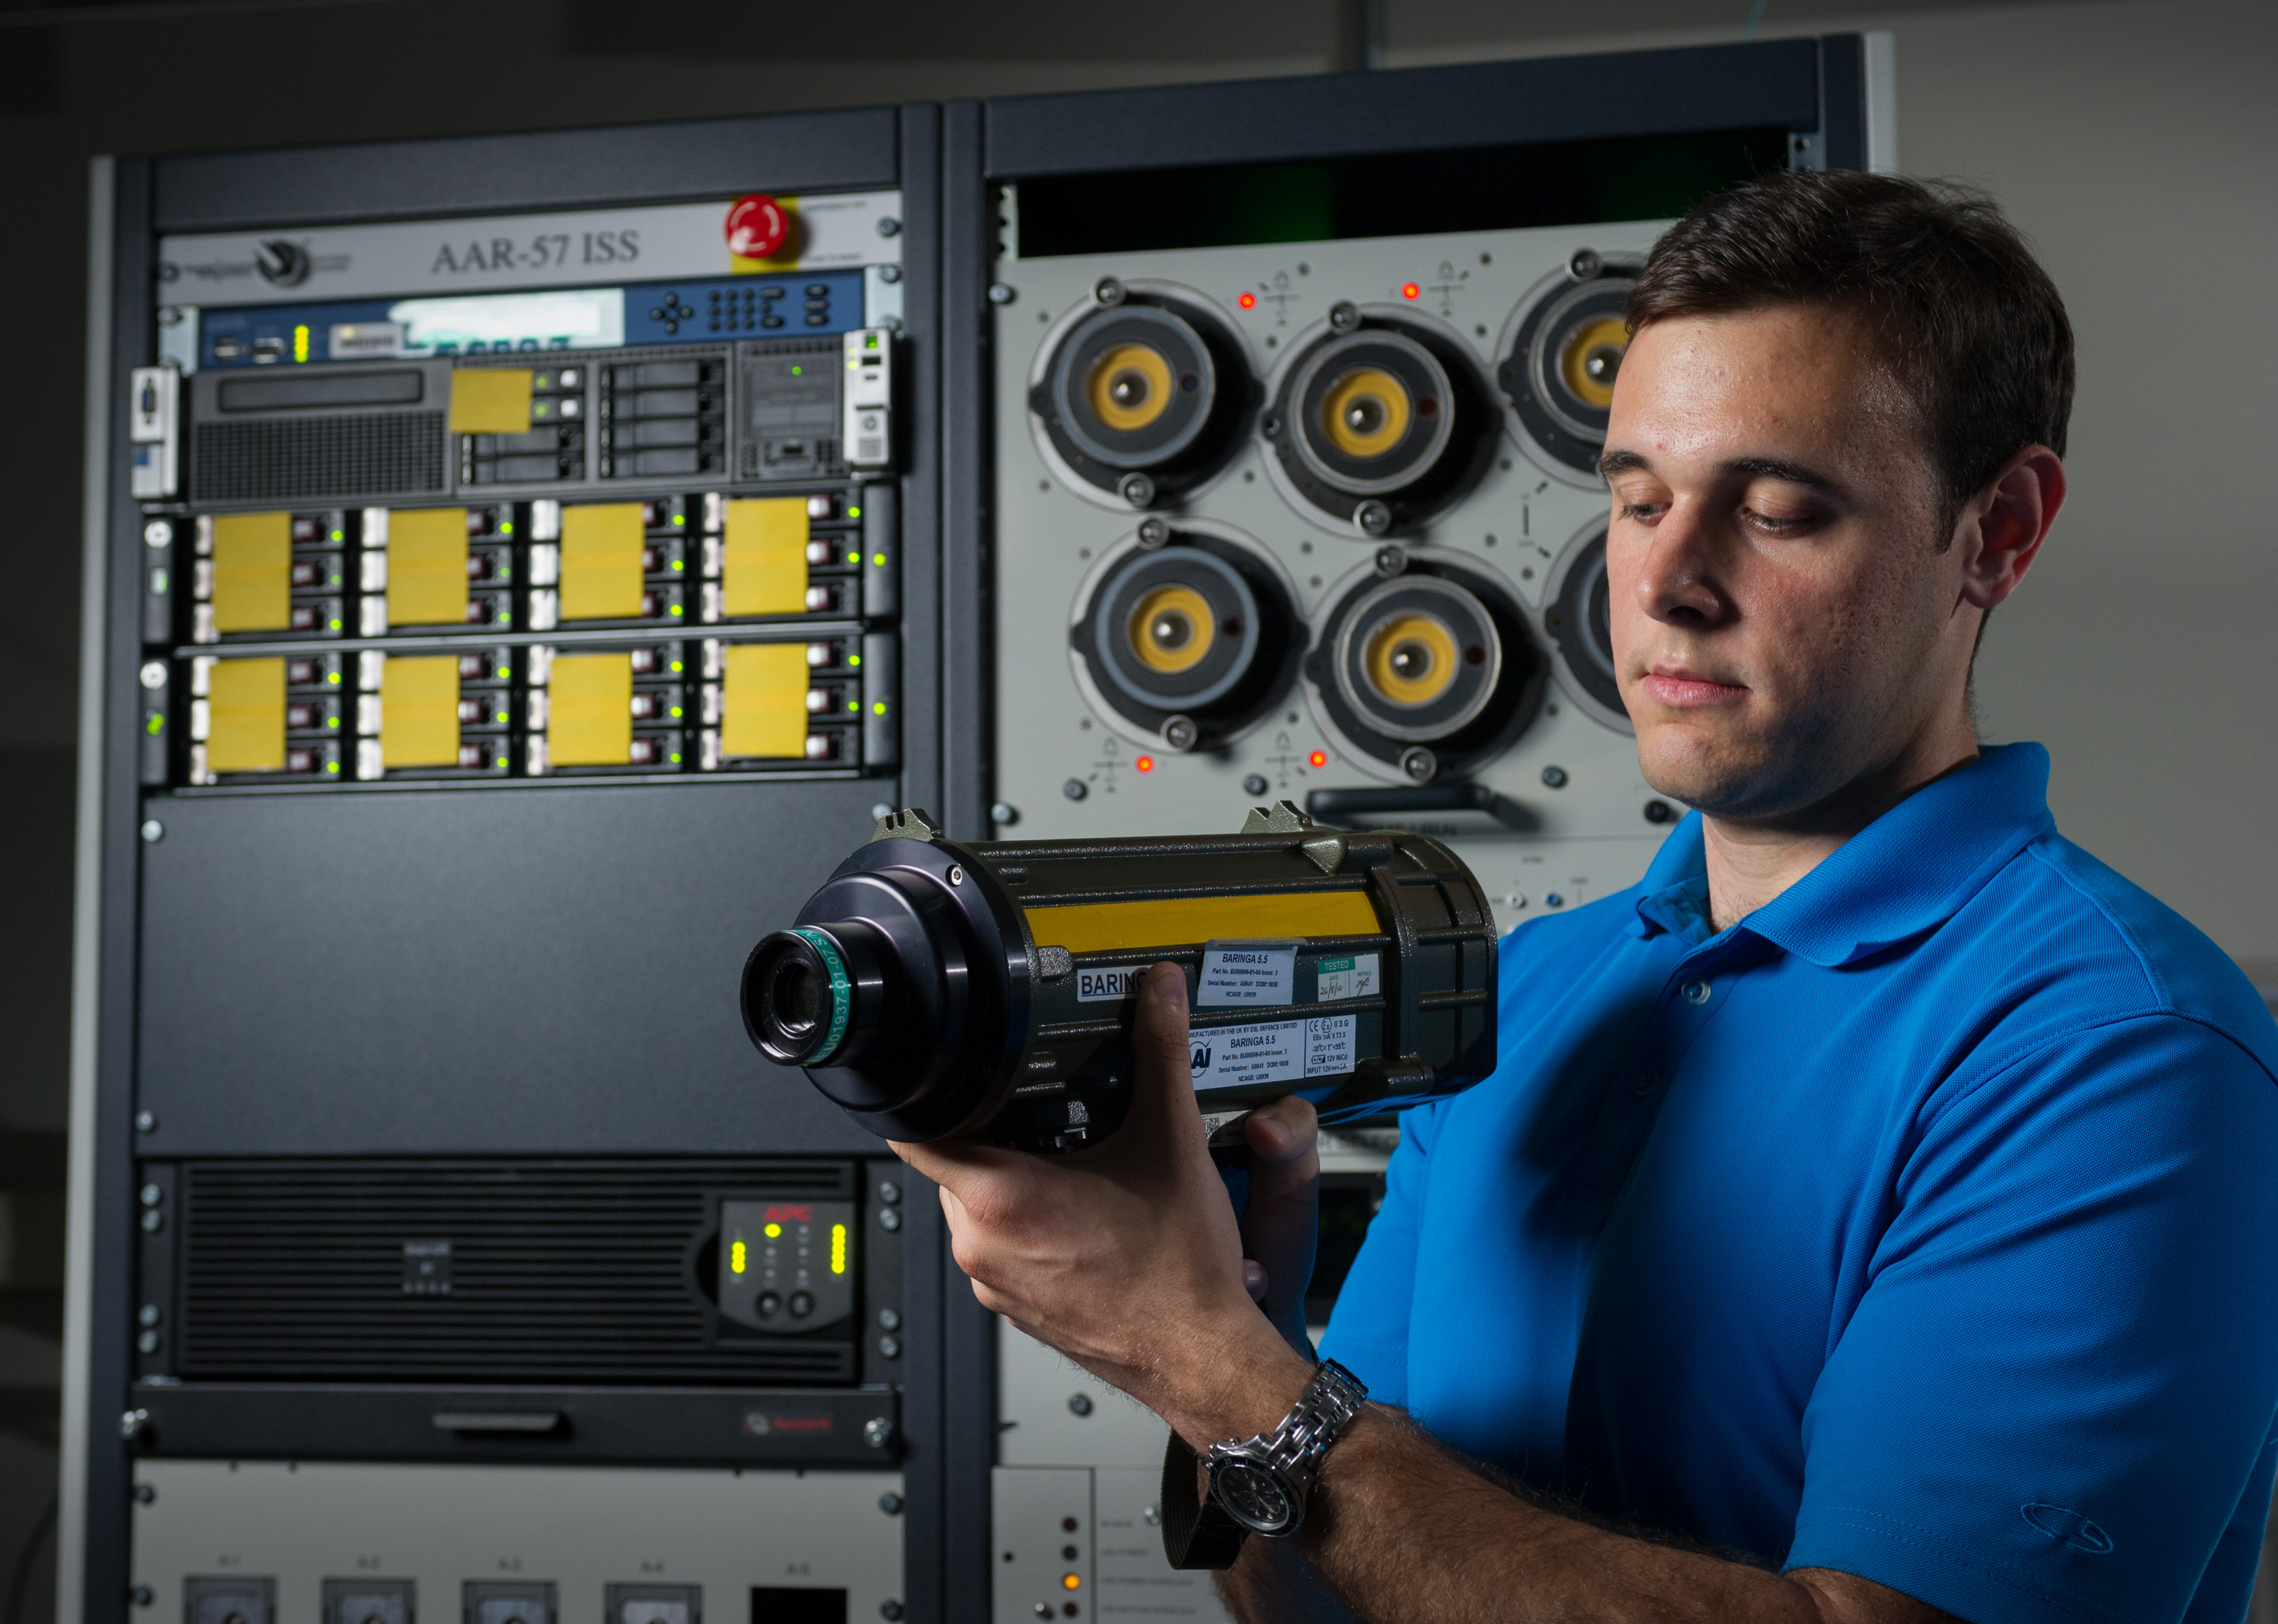 GTRI researcher Michael Coulter adjusts an instrument used to stimulate sensors that are part of the integrated support station built for testing software updates to the AN/AAR-57 Common Missile Warning System. (Photo: Rob Felt)